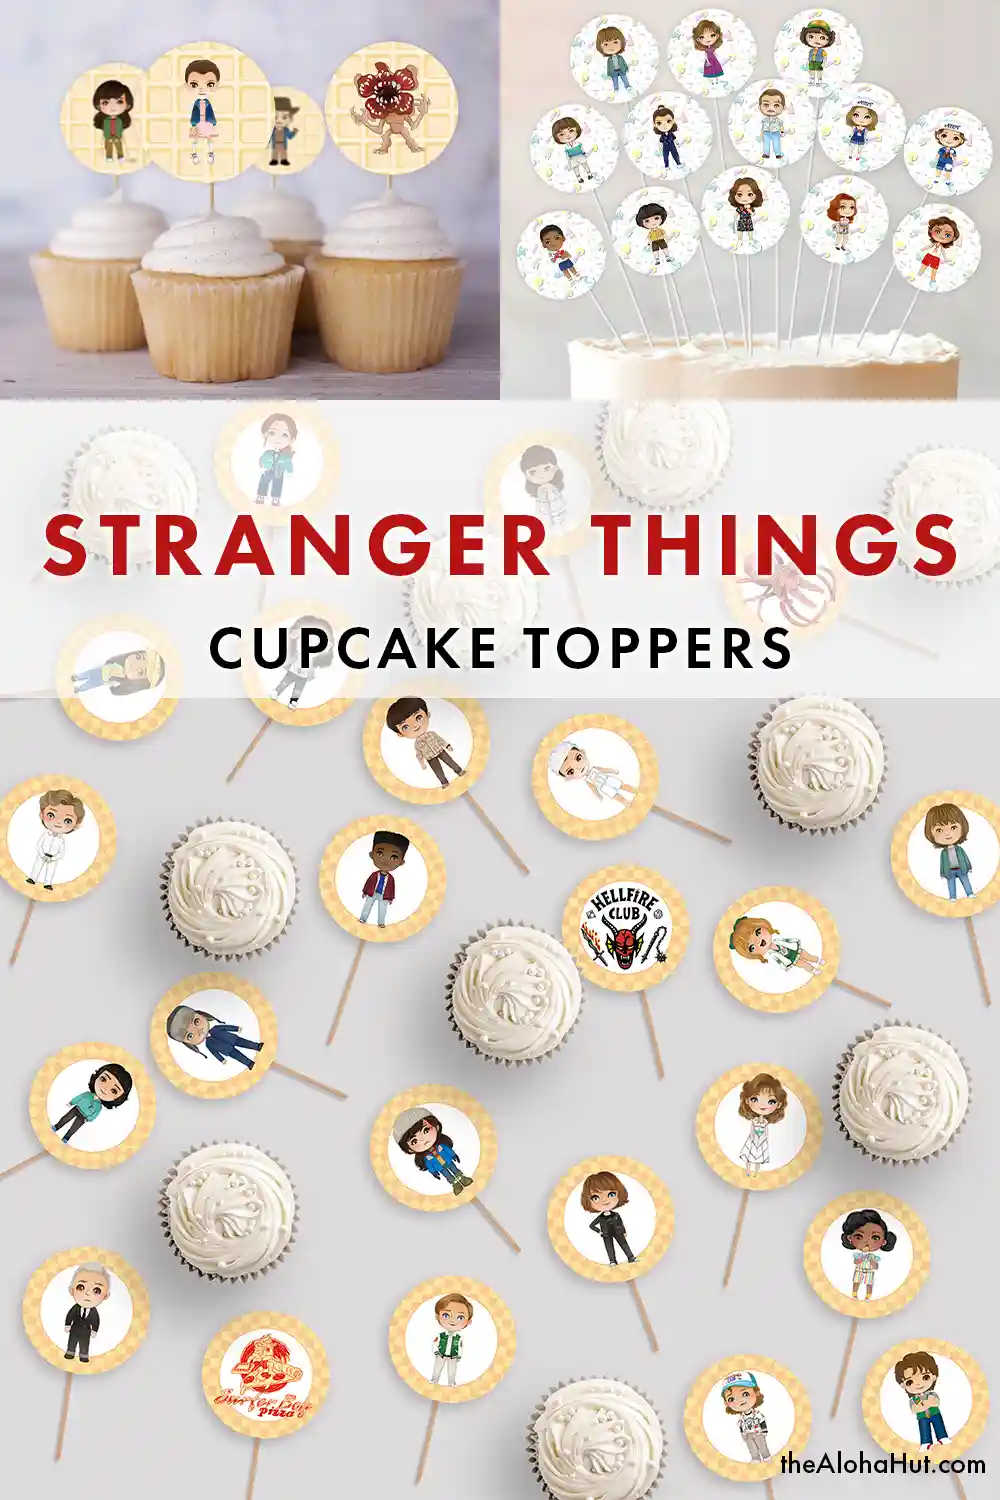 Stranger Things Party Invites & Cupcake Toppers